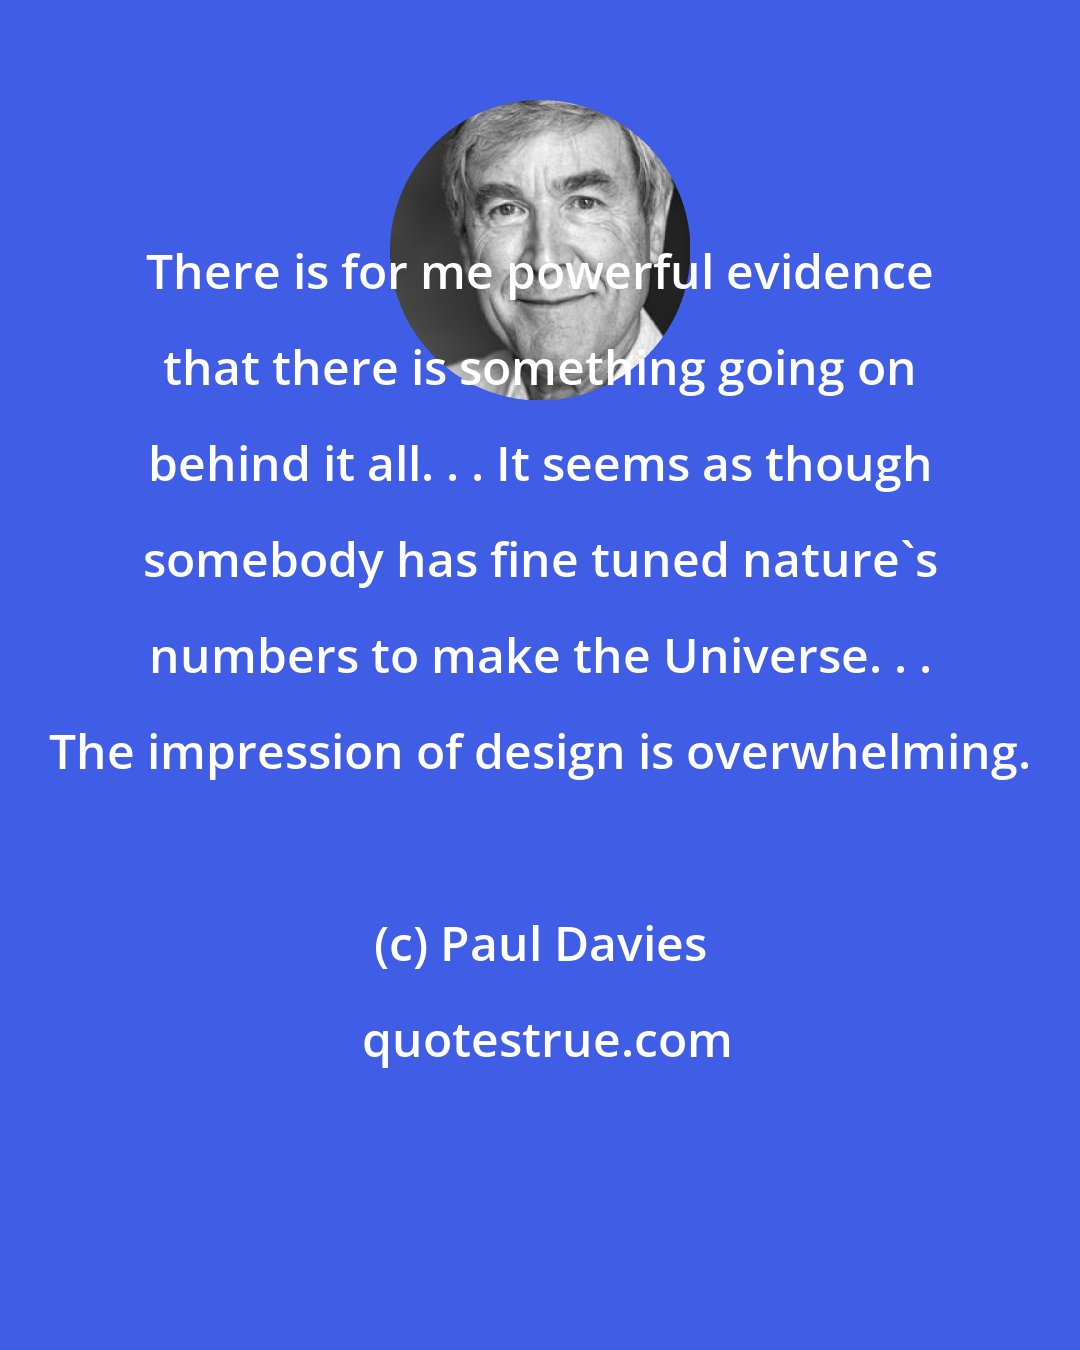 Paul Davies: There is for me powerful evidence that there is something going on behind it all. . . It seems as though somebody has fine tuned nature's numbers to make the Universe. . . The impression of design is overwhelming.